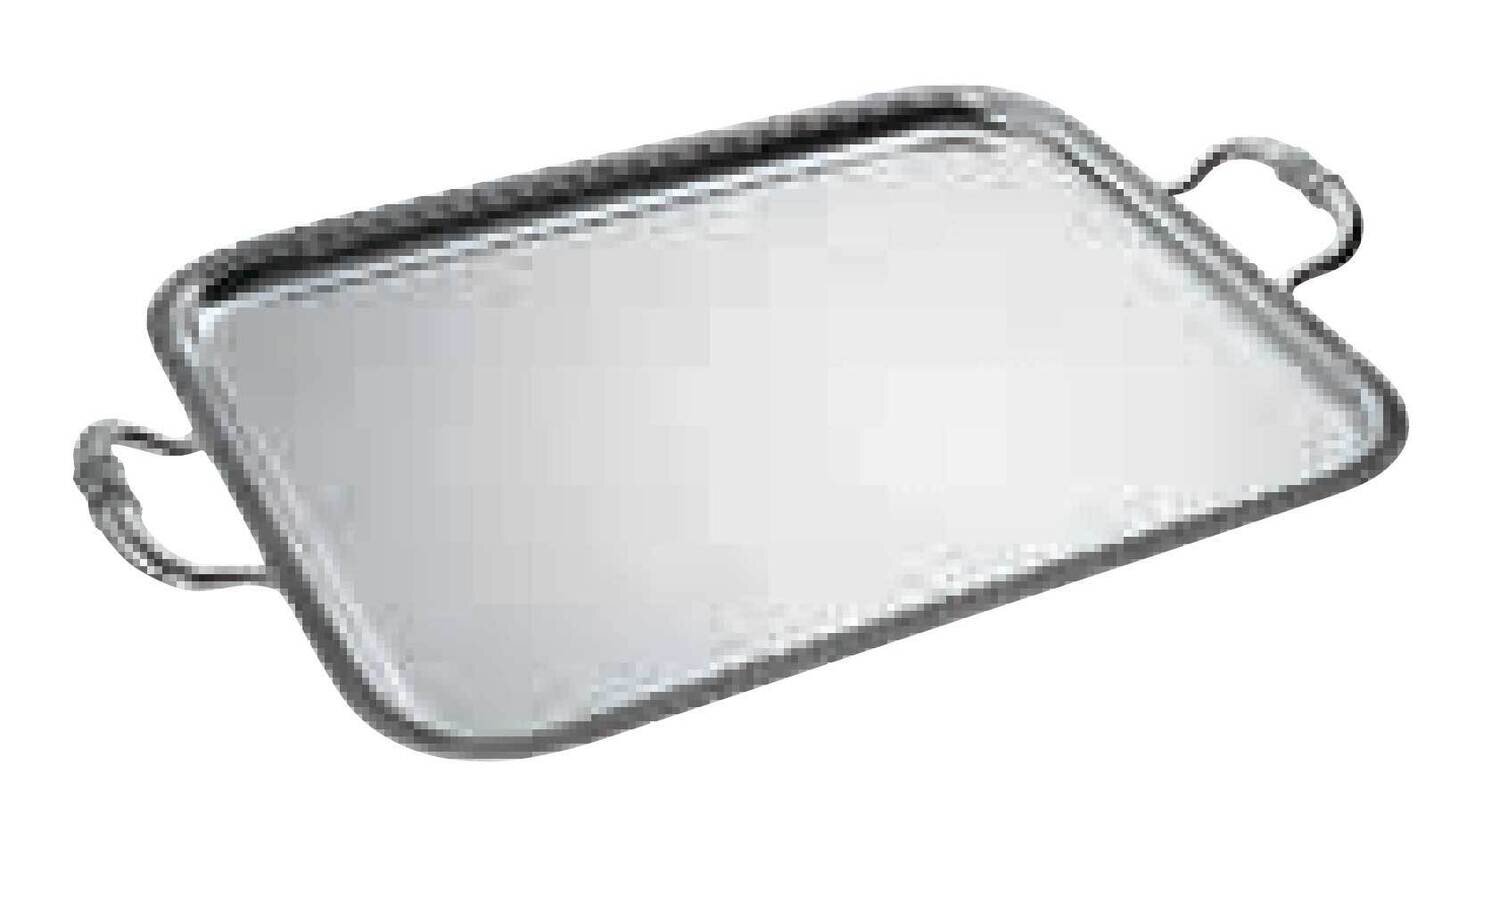 Ercuis Empire Rectangular Serving Tray With Handles 22.5 x 18.875 Inch Silver Plated F500450-57